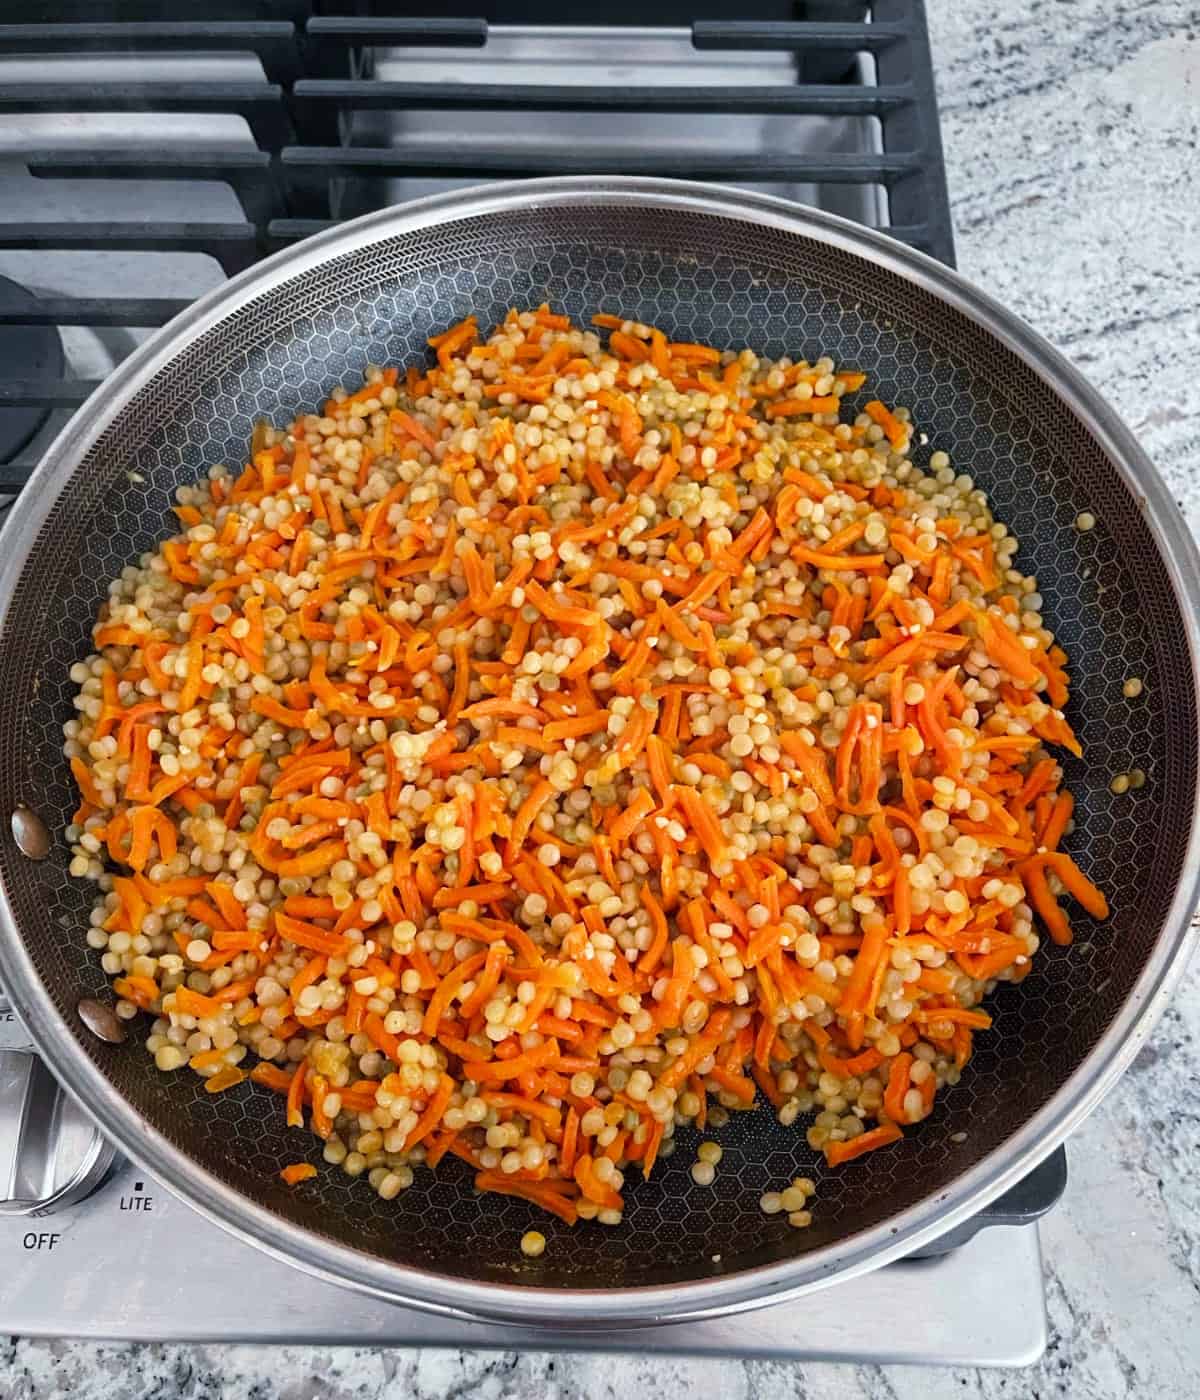 Carrot couscous skillet on stovetop.